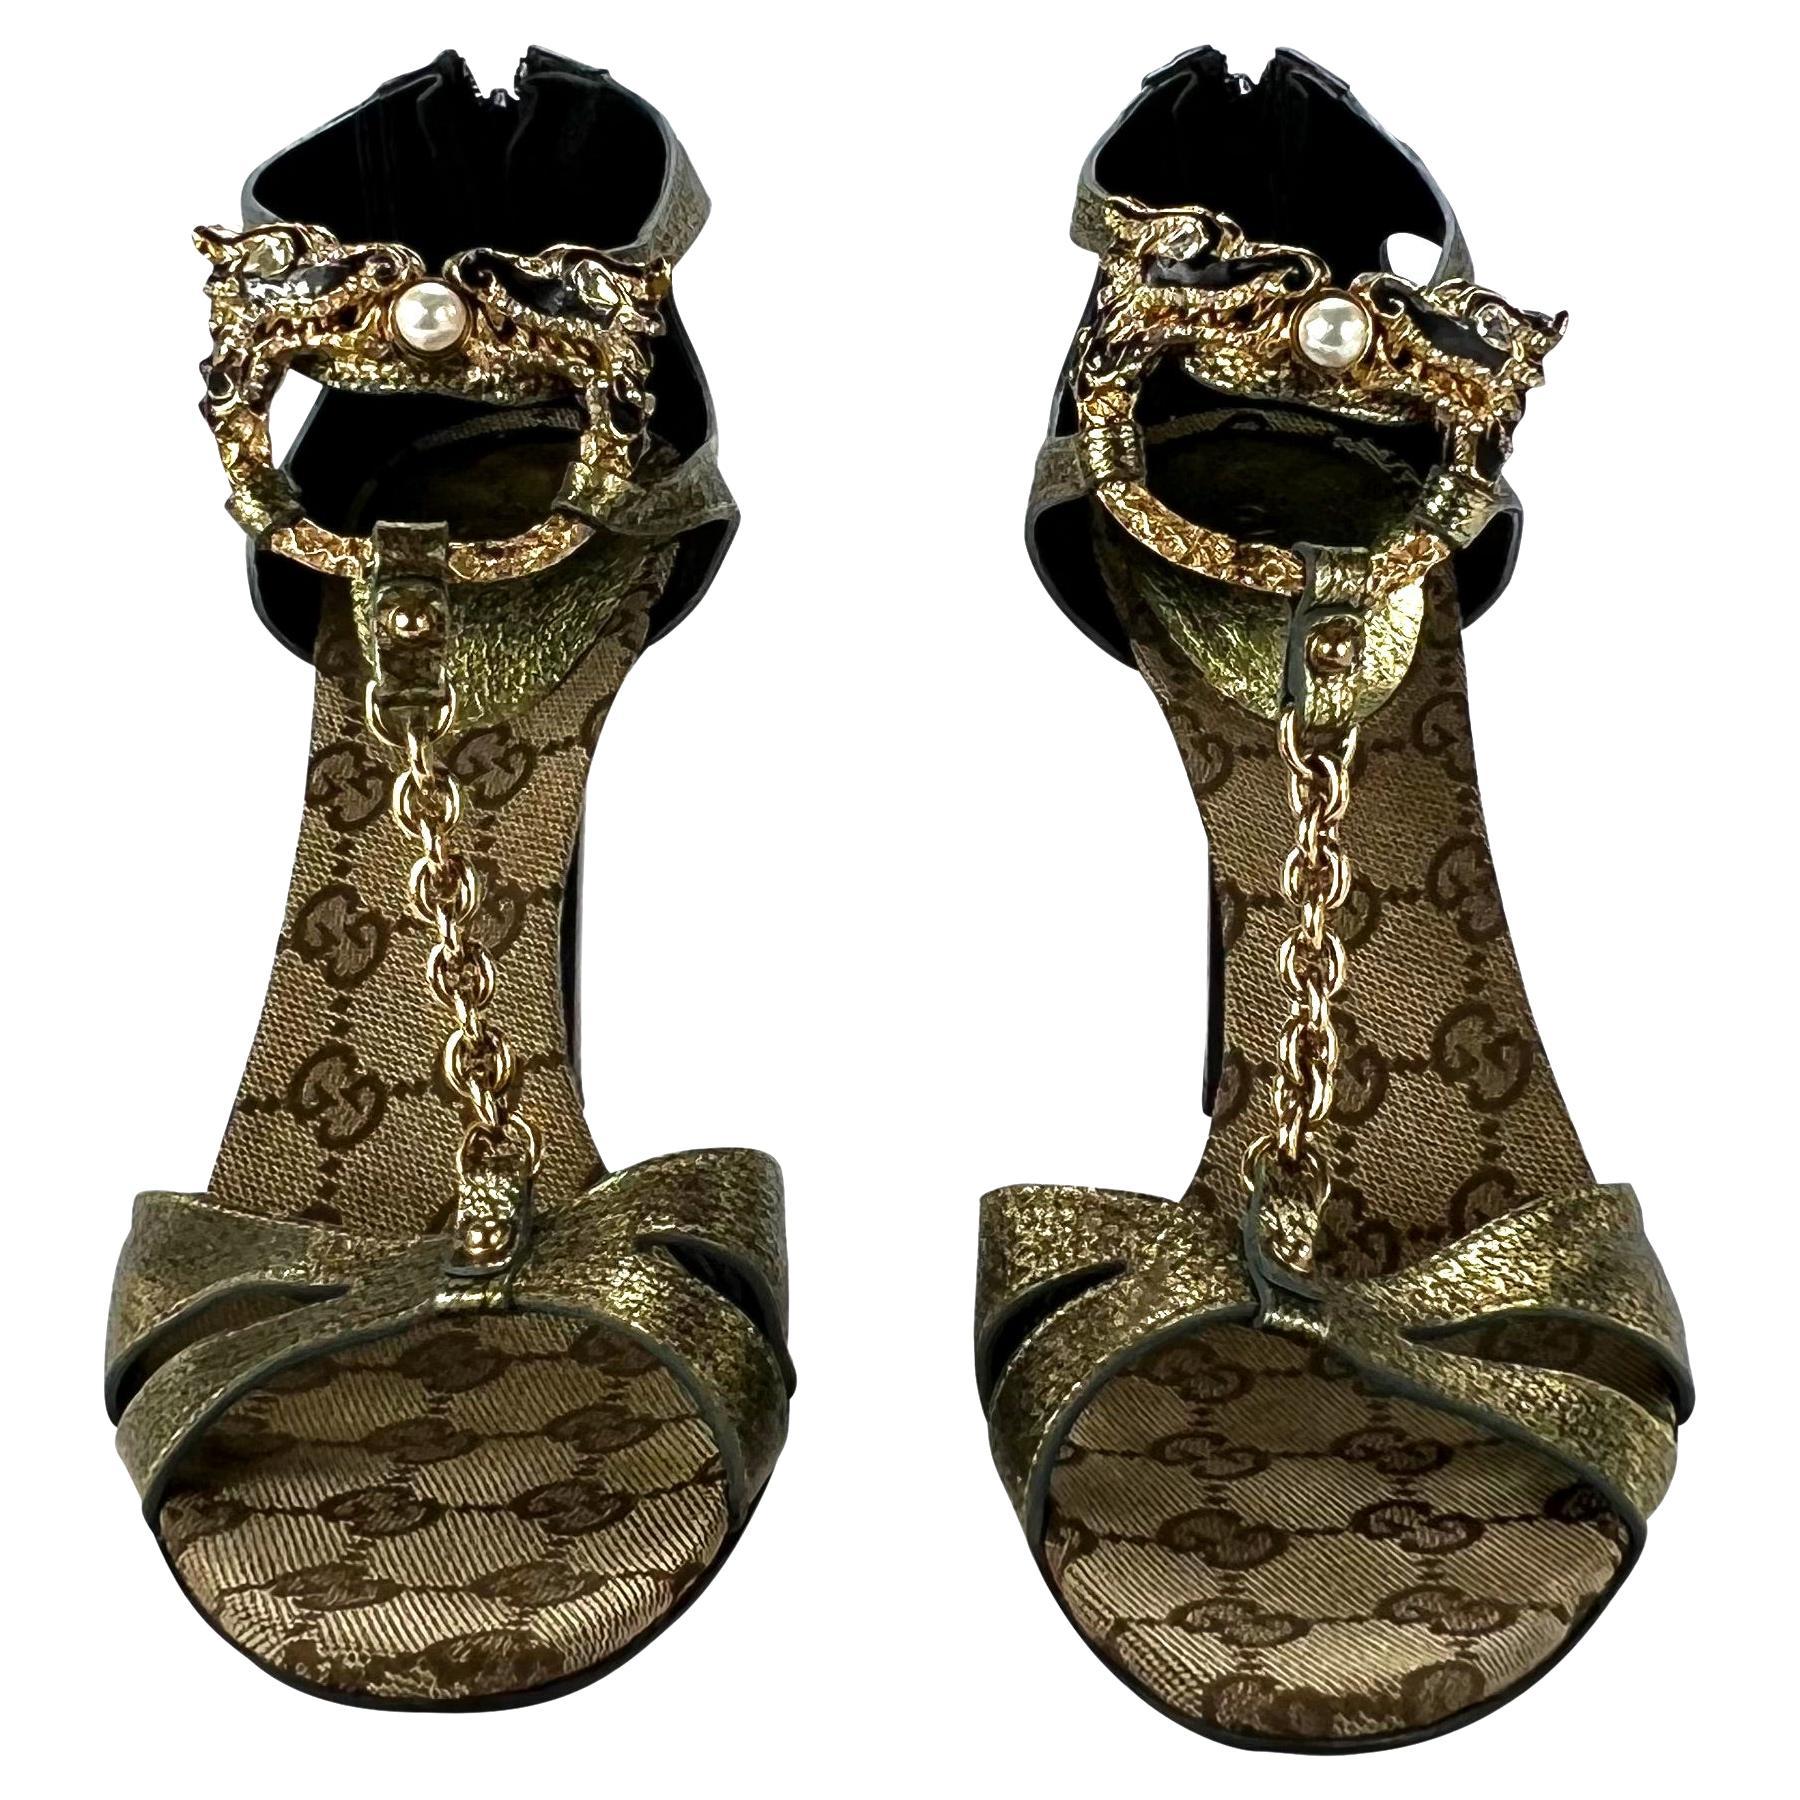 Presenting a pair of stunning gold leather Gucci dragon heels, designed by Tom Ford. From the Fall/Winter 2004 collection, these strap heels feature a Gucci 'GG' monogram insole and an interlocking metal dragon made complete with enamel, rhinestone,